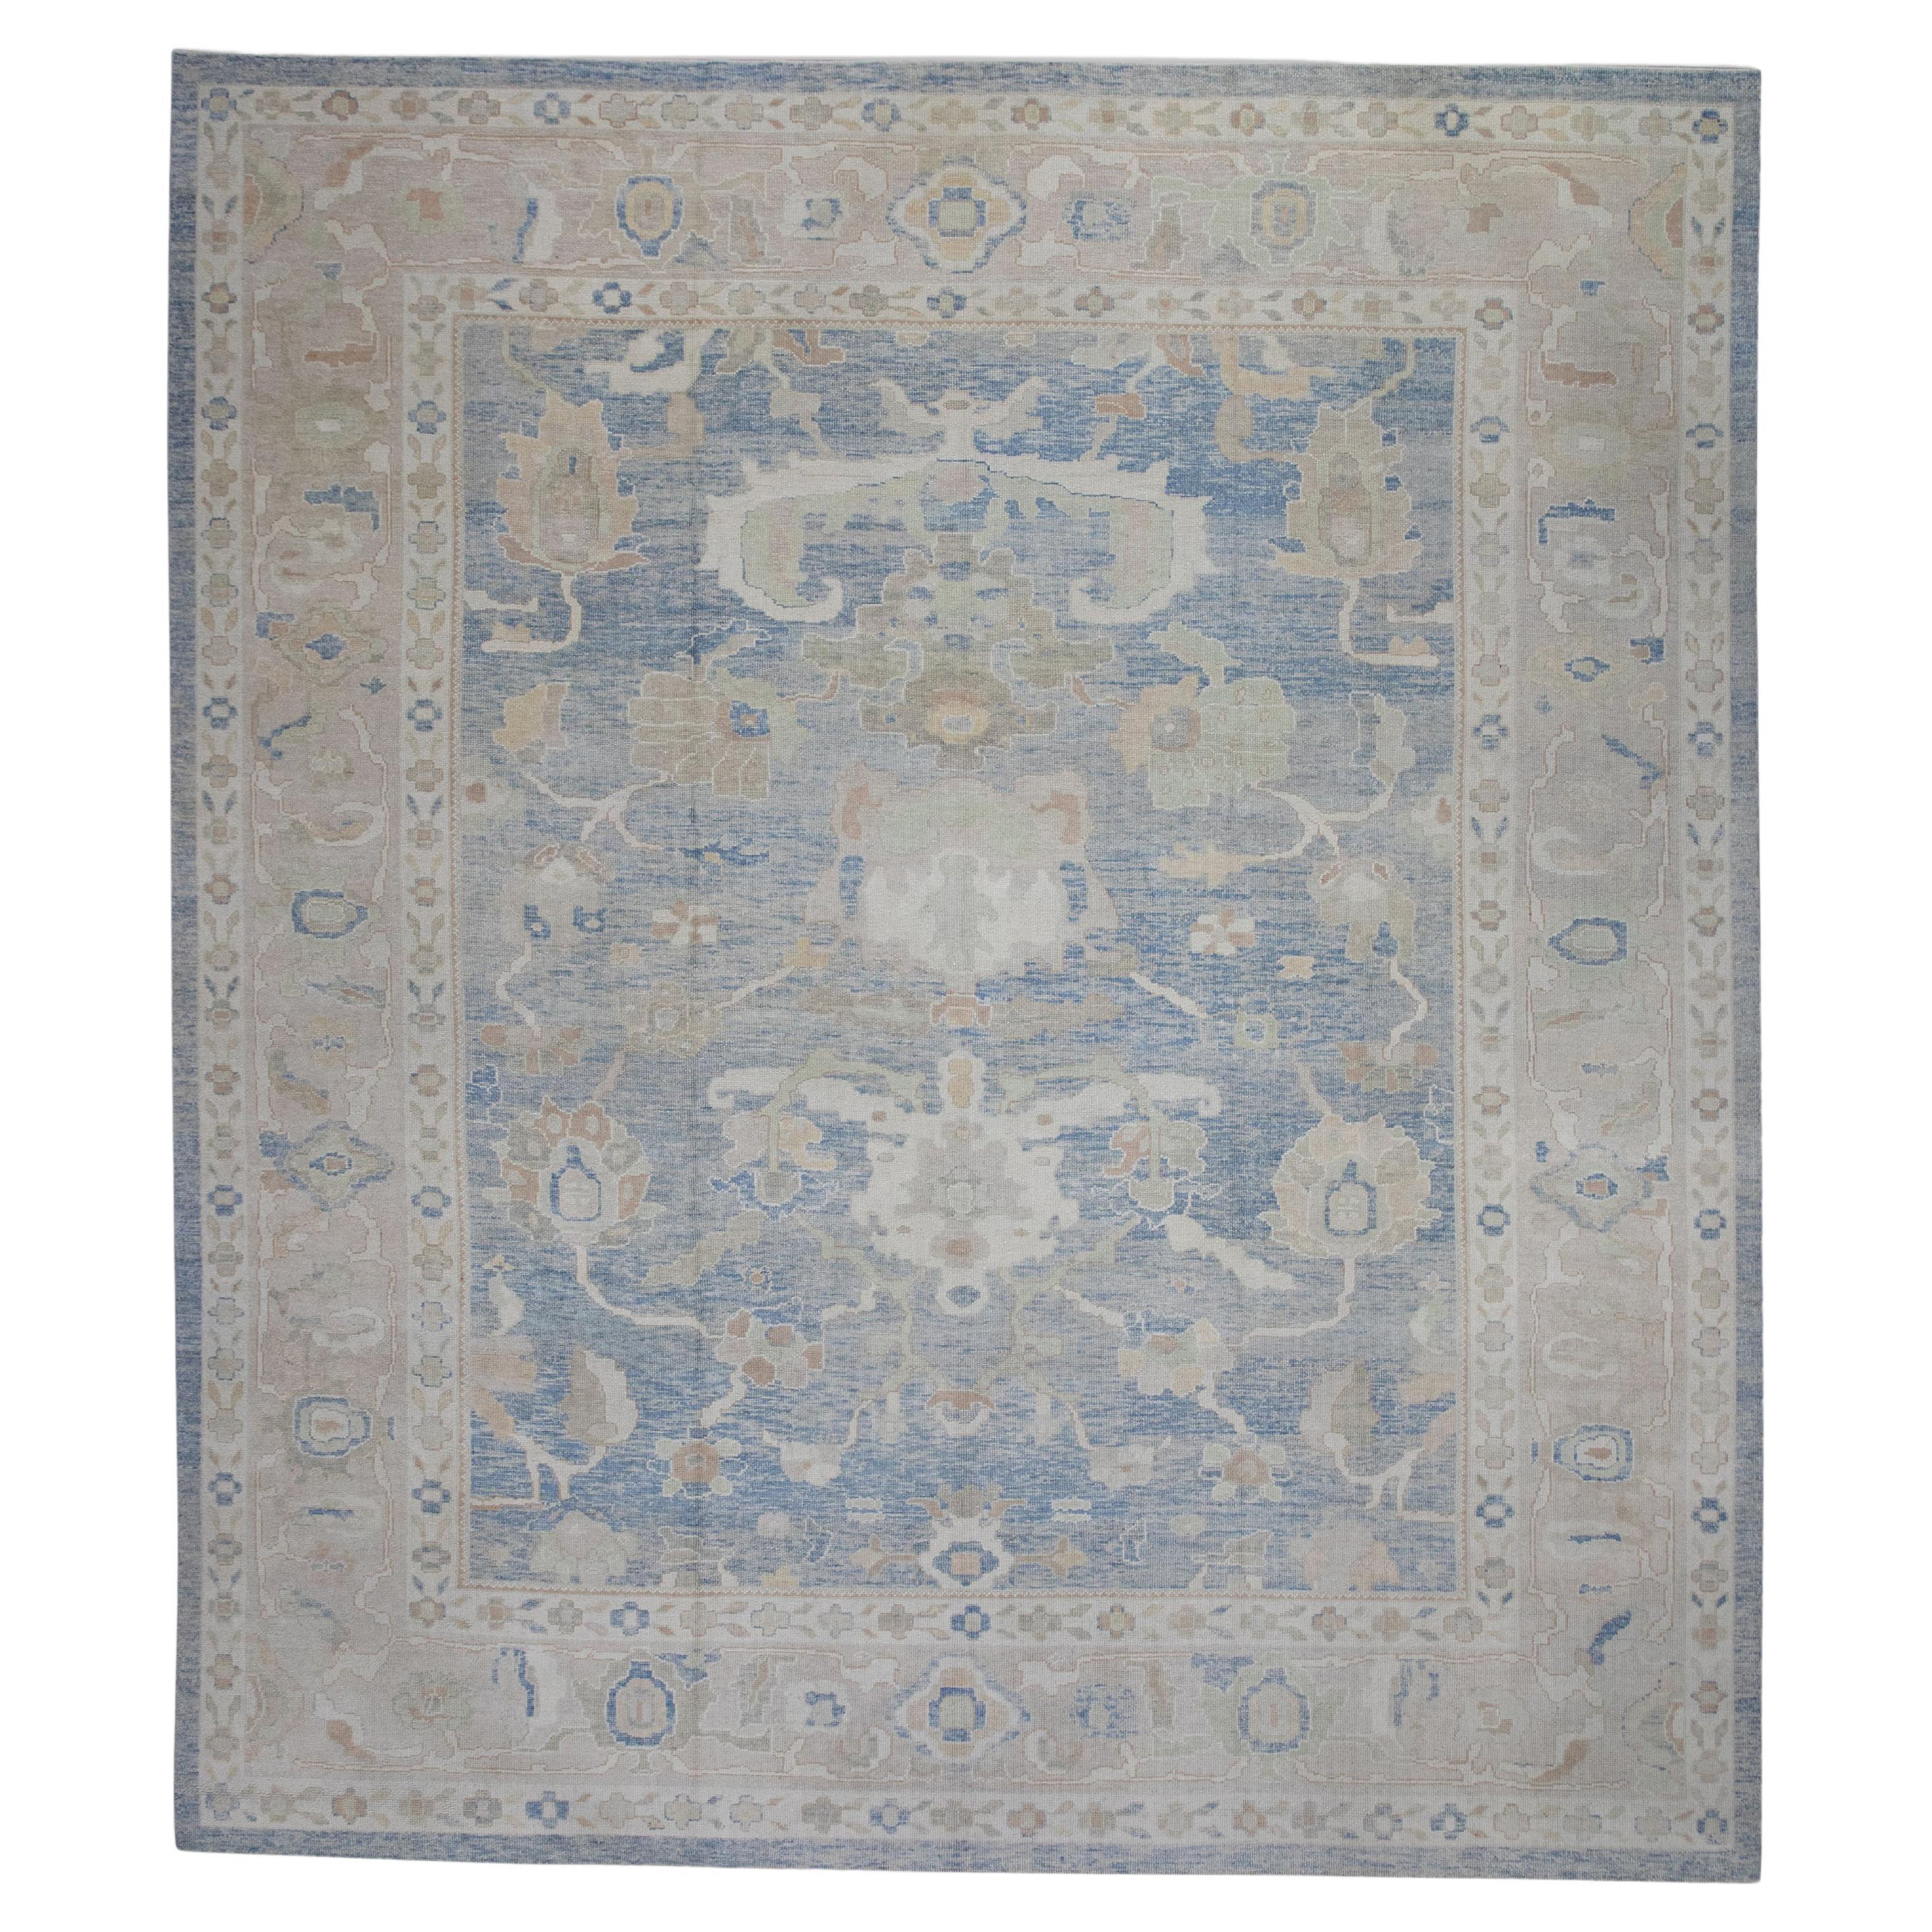 Blue & Taupe Floral Design Handwoven Wool Turkish Oushak Rug 12'6" X 14'6" For Sale